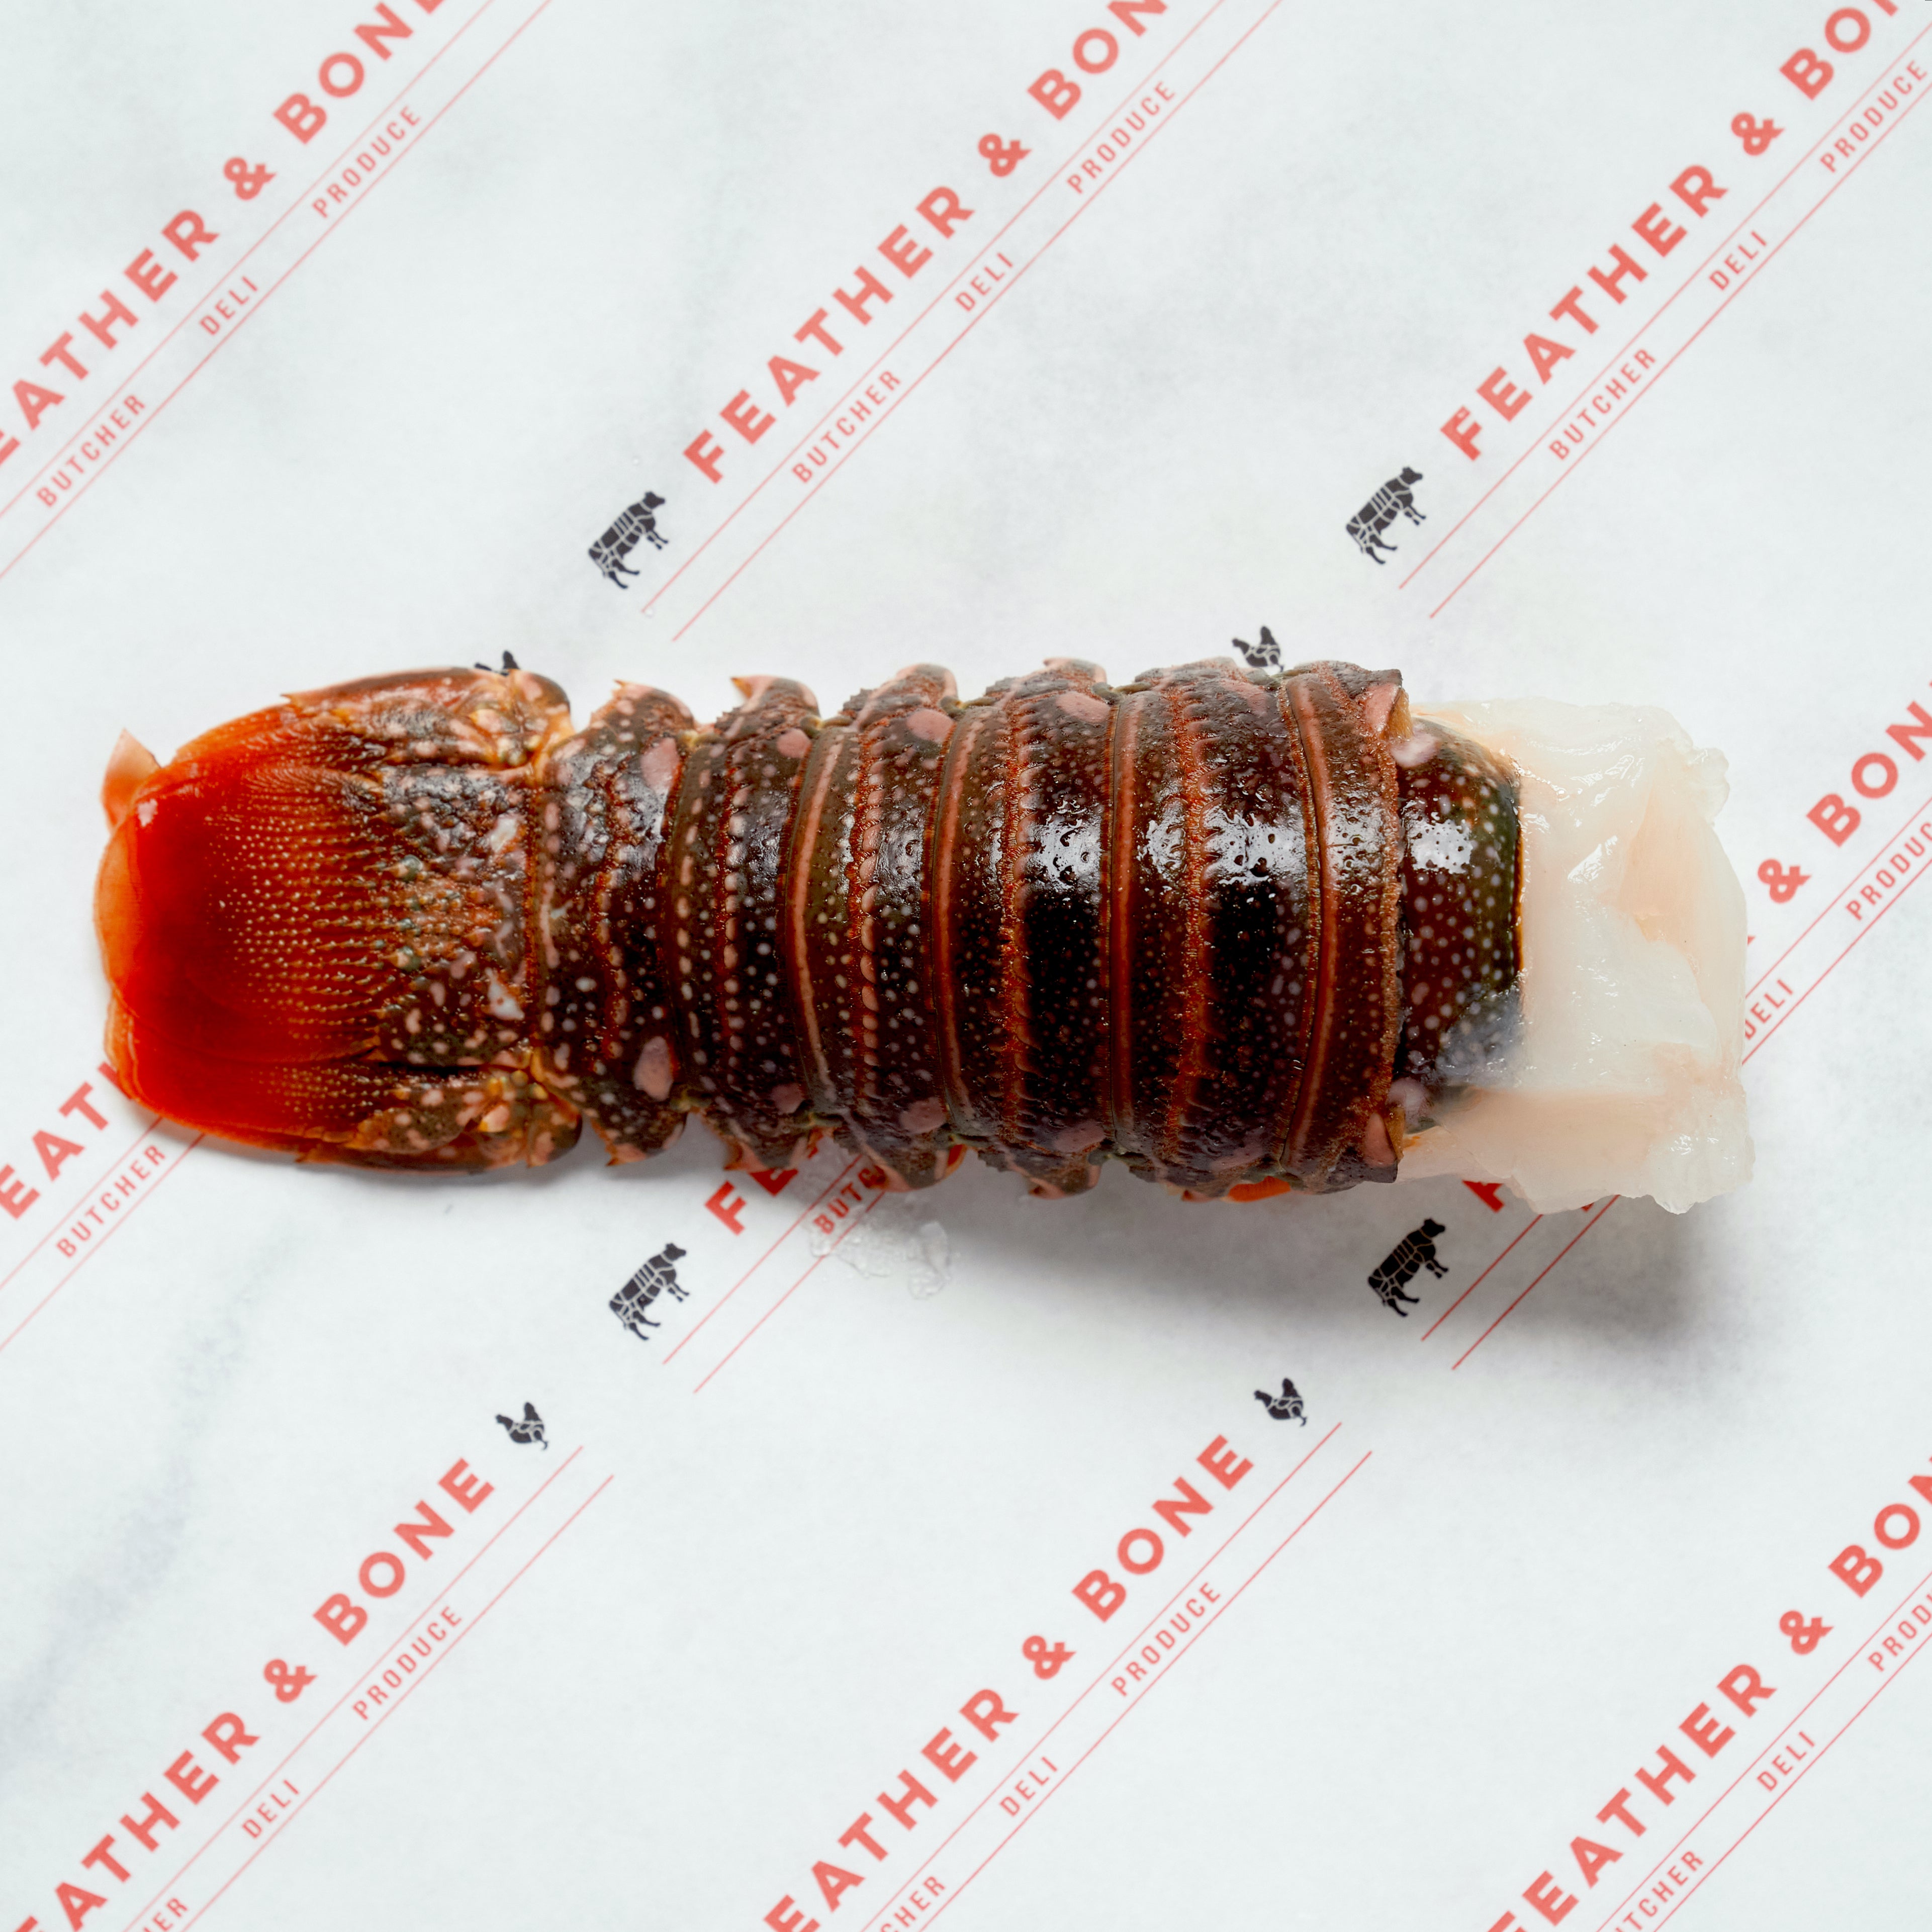 Canadian Lobster Tail 140g Frozen)